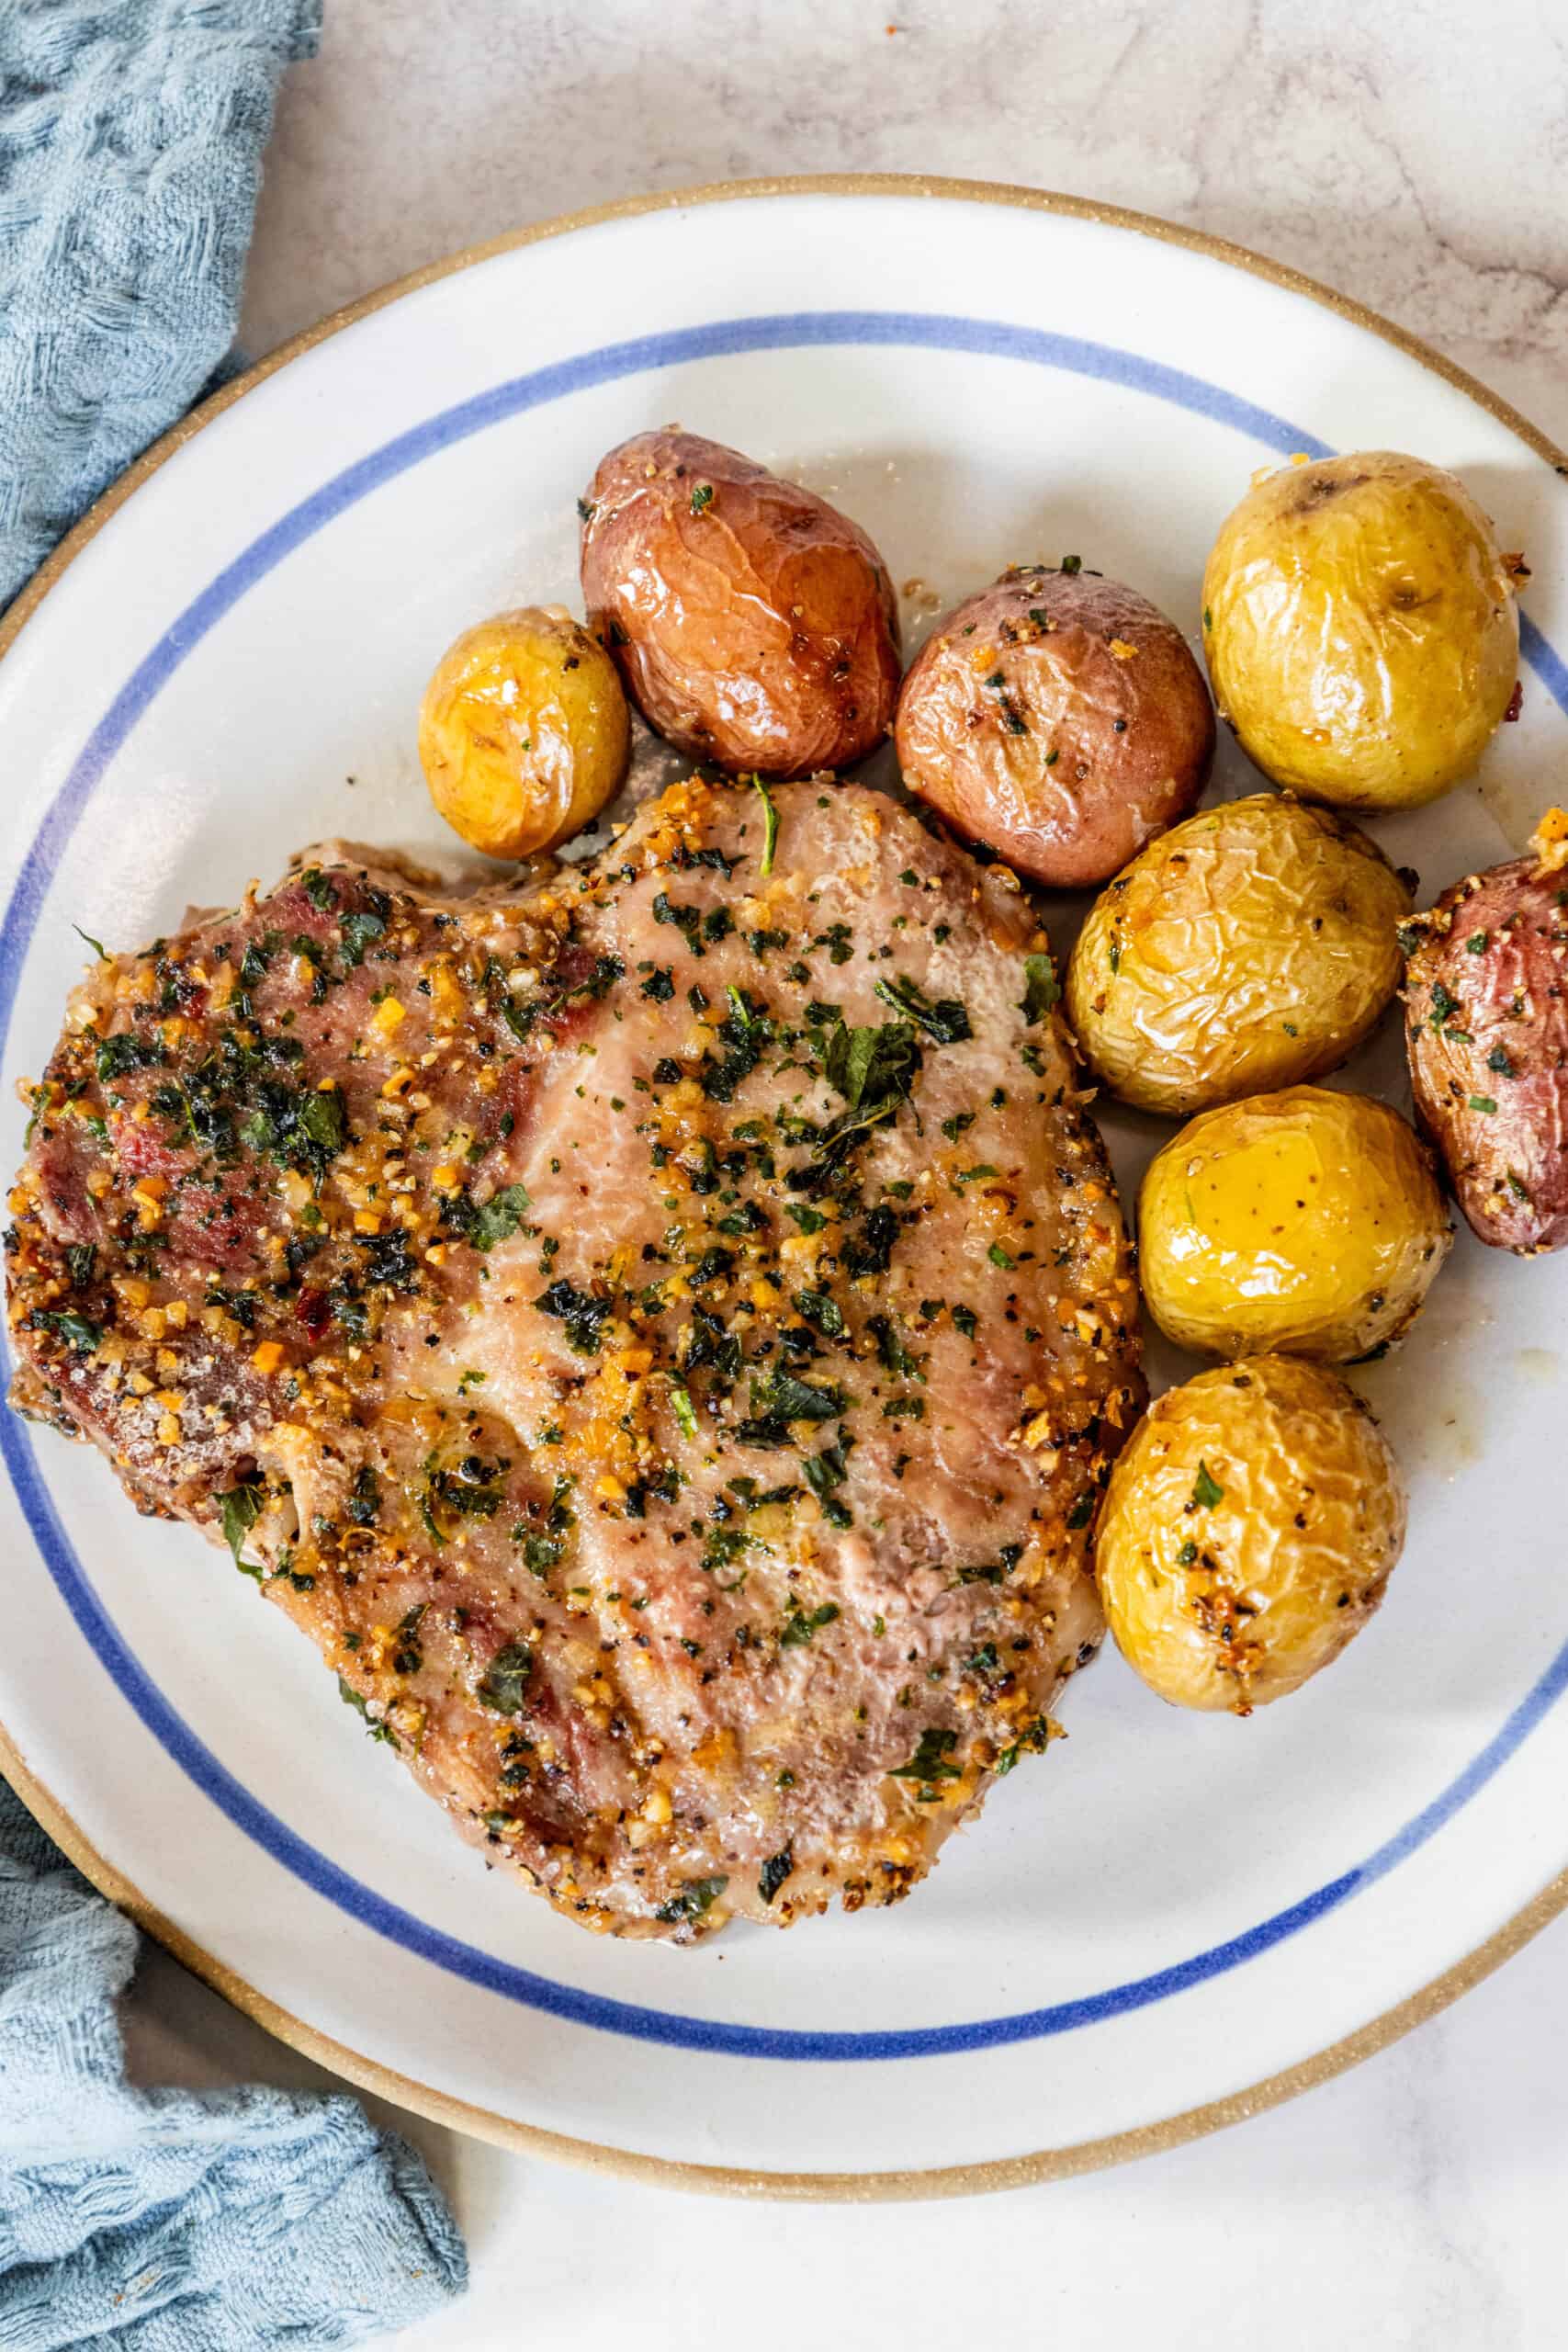 A plate of food with potatoes and pork chops.